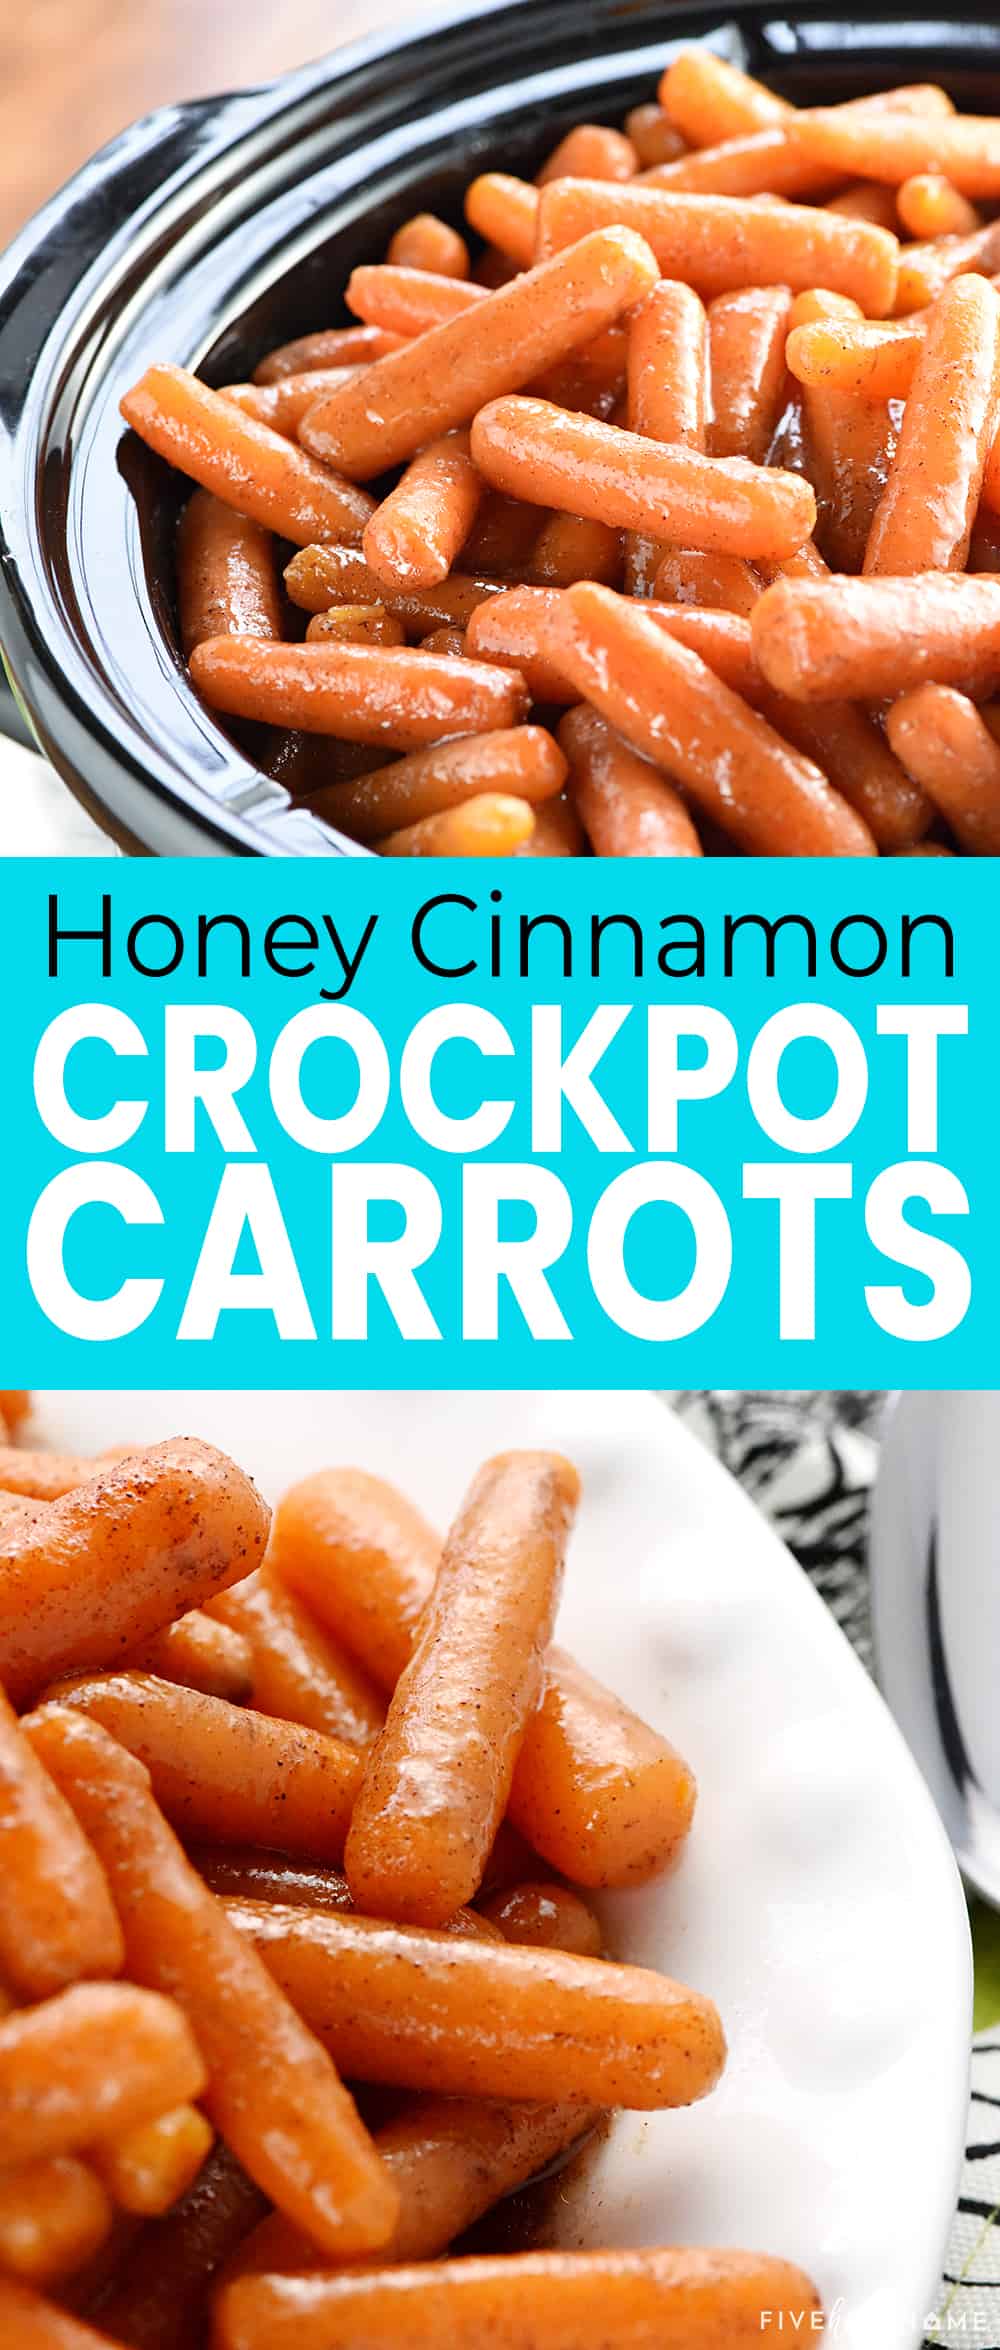 Slow Cooker Honey Cinnamon Carrots ~ these crockpot carrots are a sweet, buttery, and addictive side dish...the perfect recipe for freeing up the oven and feeding a crowd, on Easter, any holiday, or a regular weeknight! | FiveHeartHome.com via @fivehearthome